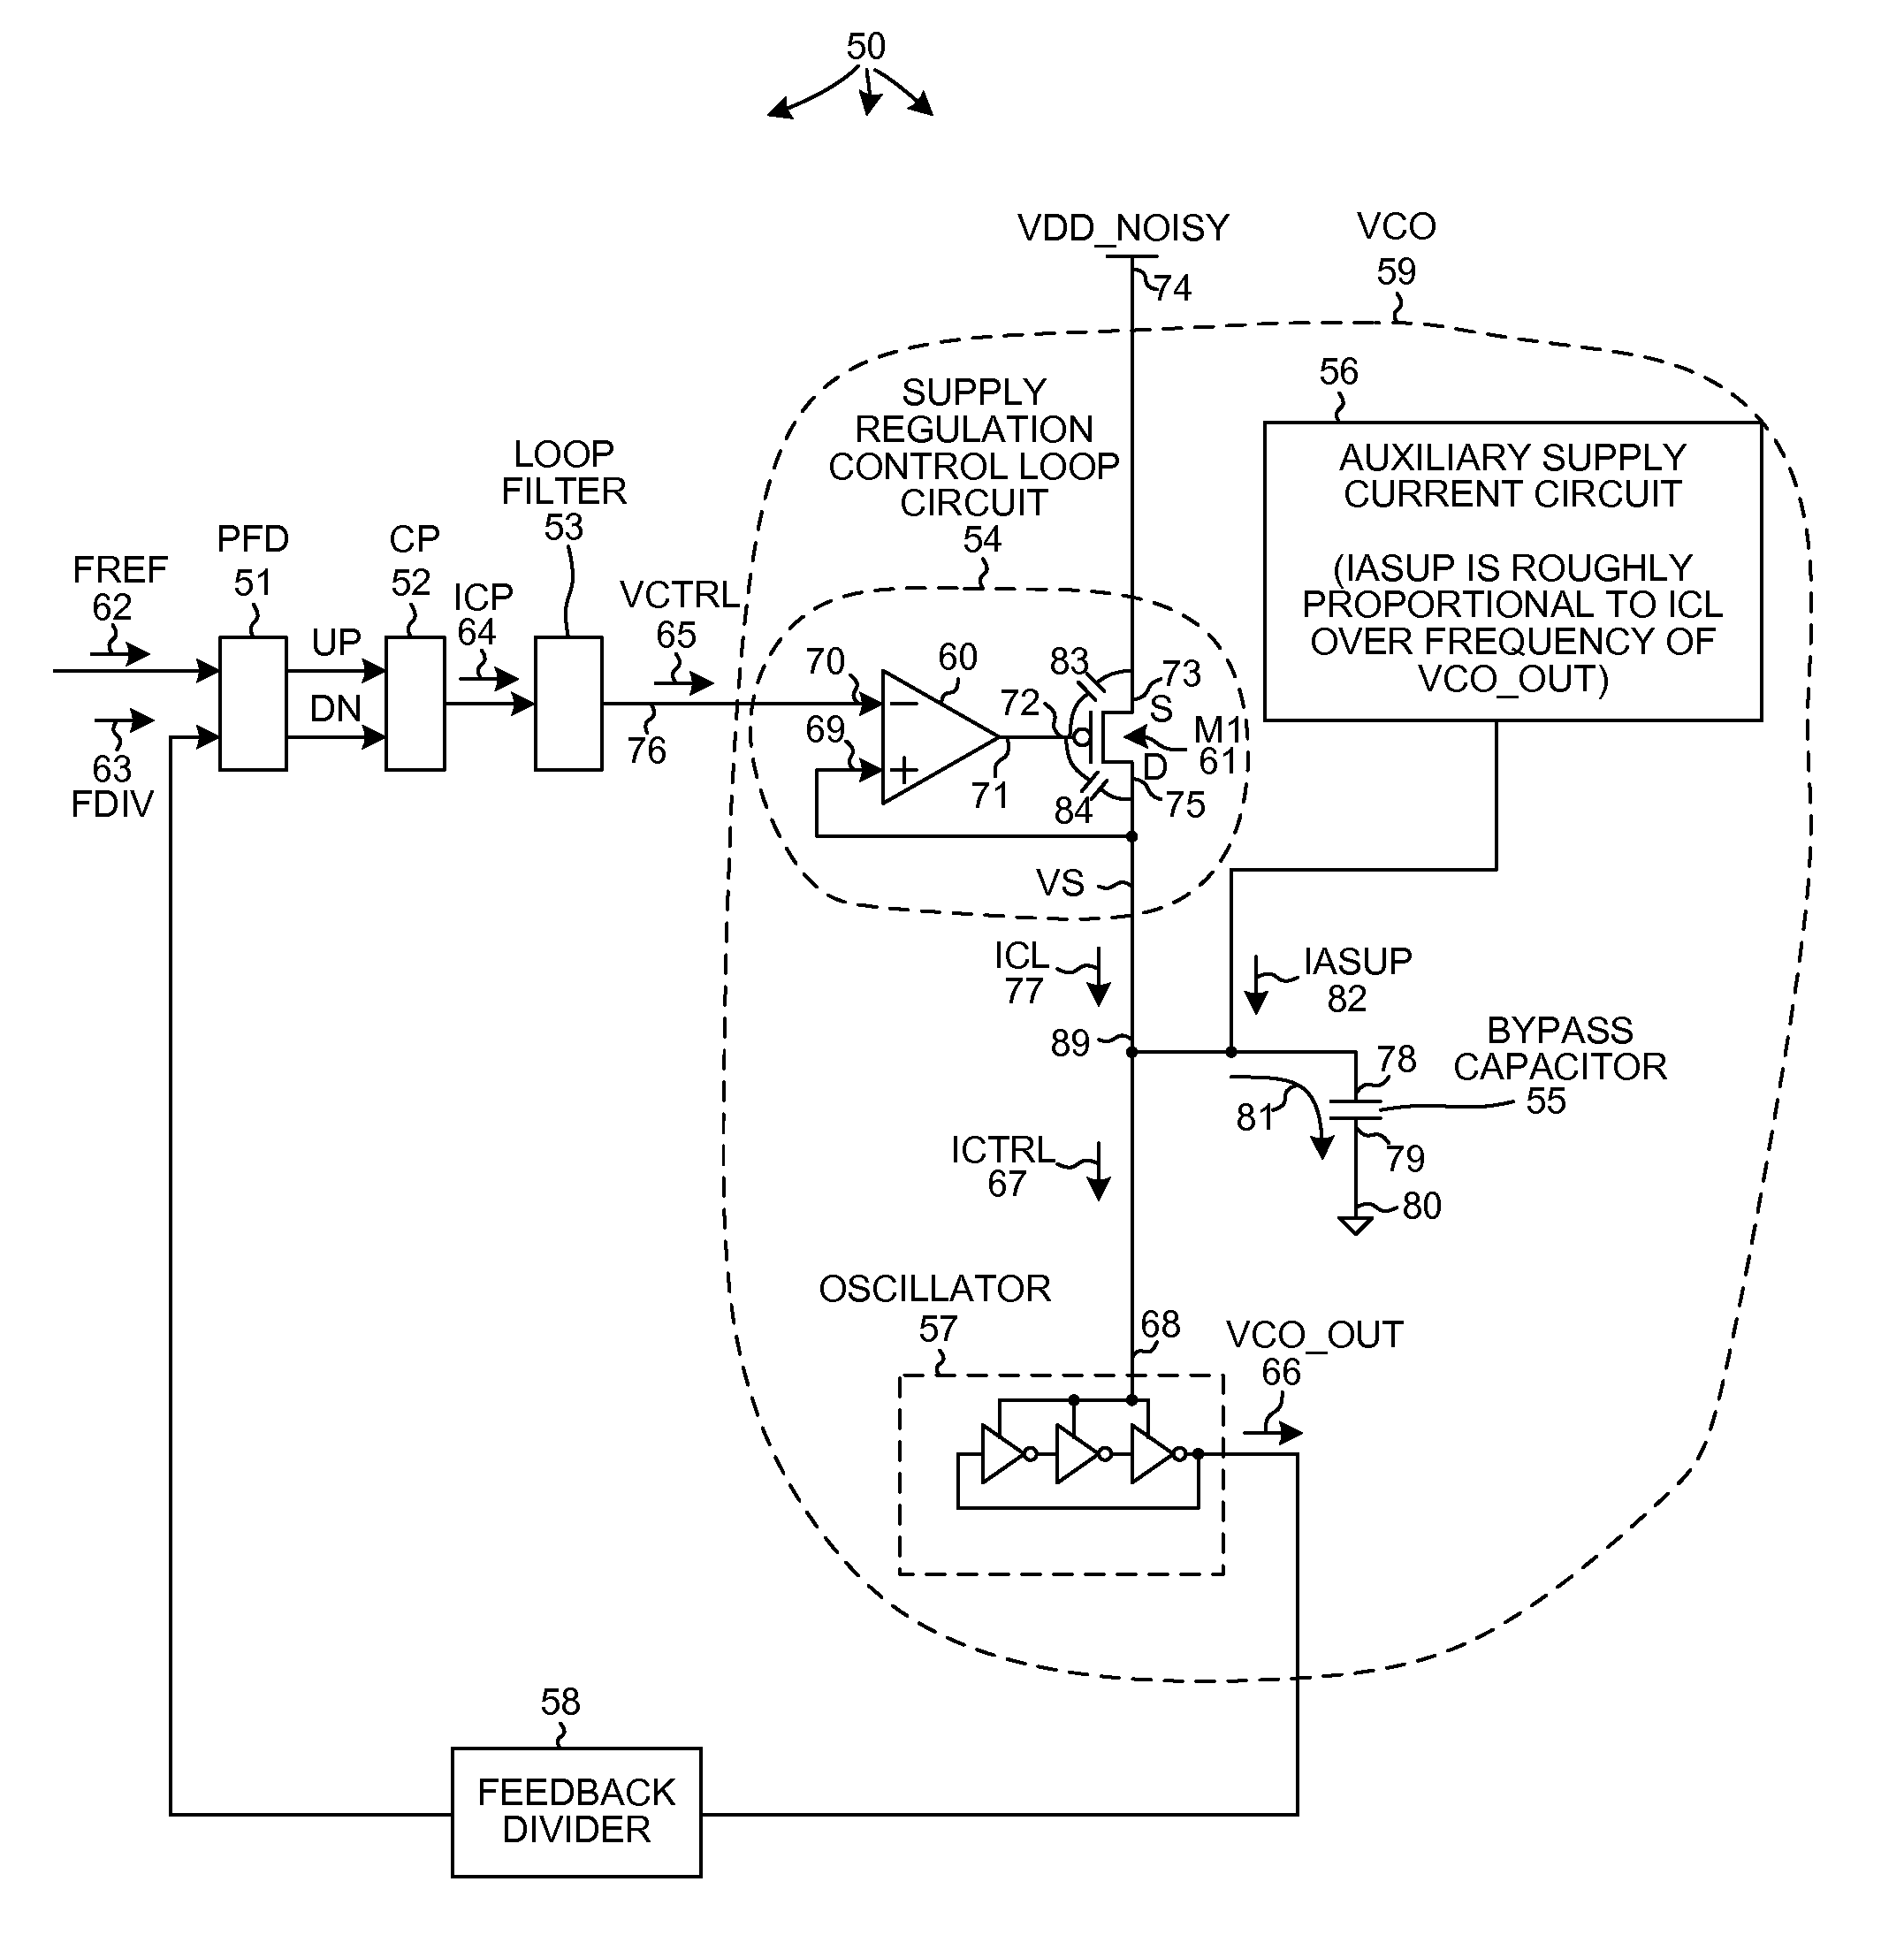 Supply-regulated VCO architecture